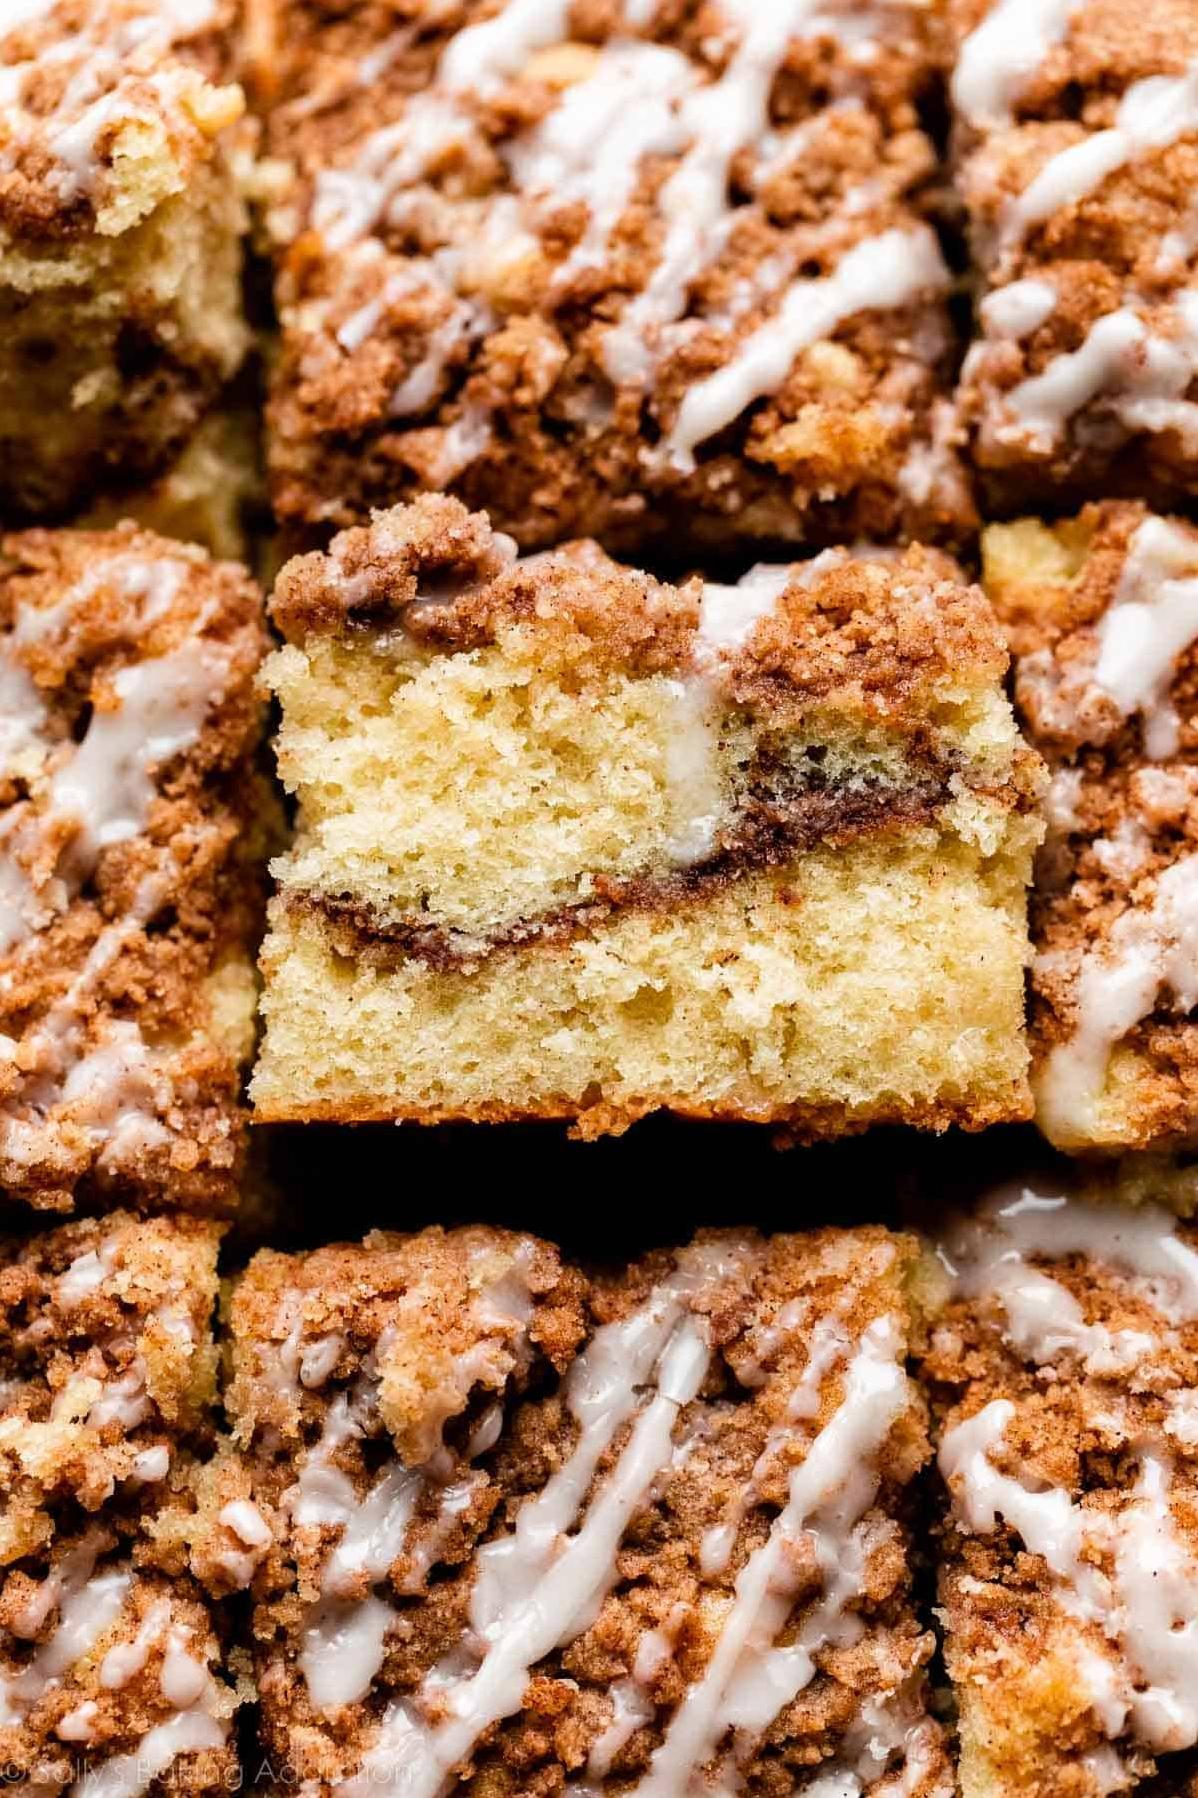  You'll fall in love with this sweet treat after just one bite